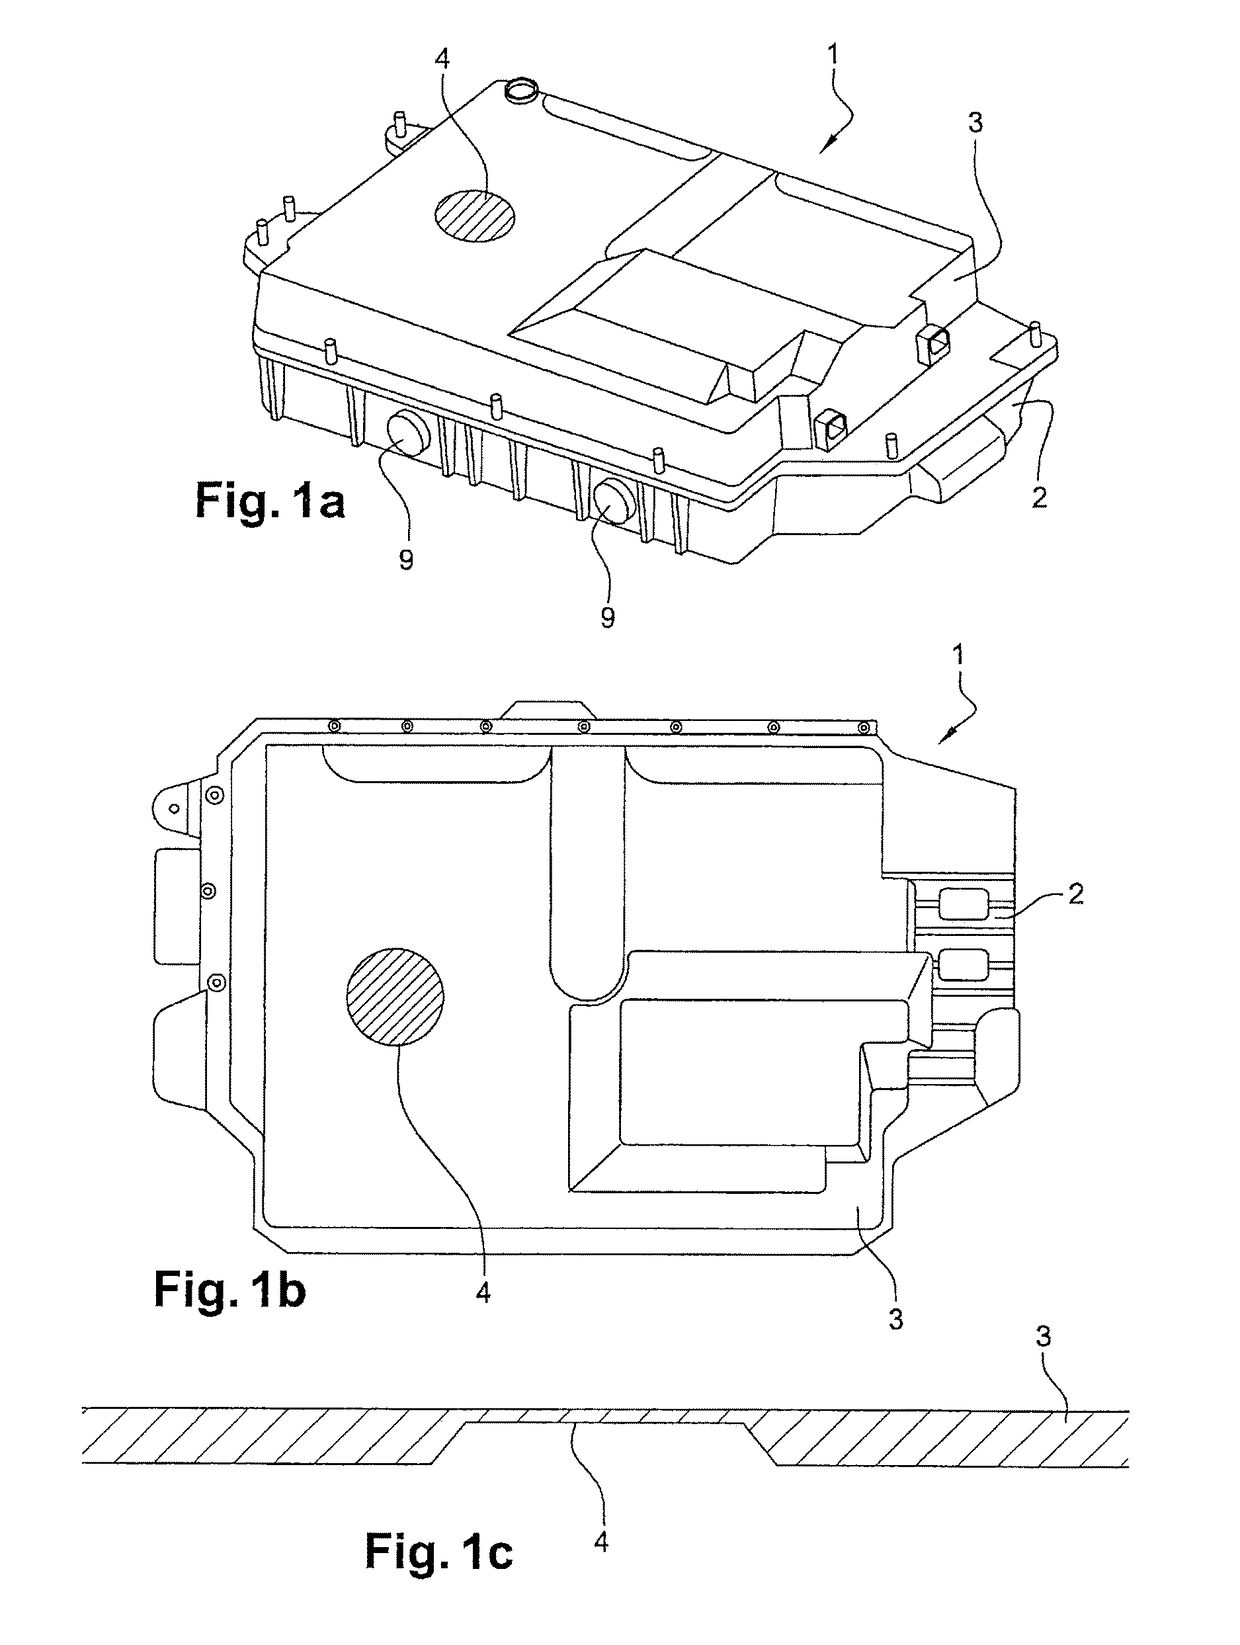 Filling device for firefighters of a drive battery of an electric or hybrid vehicle